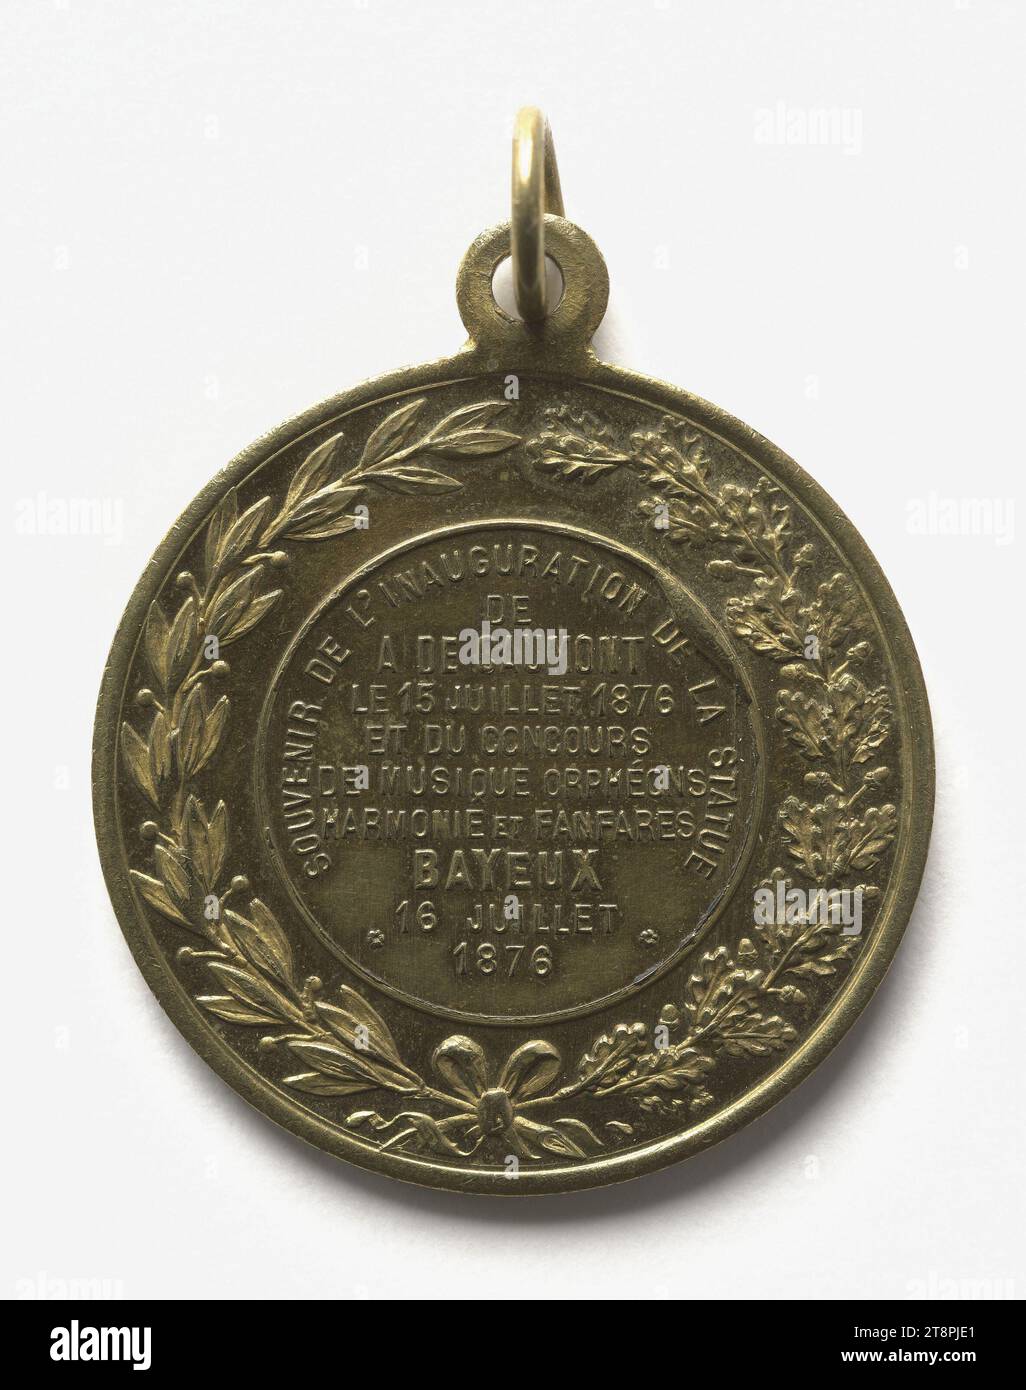 Inauguration of the statue of A. de Caumont and music contest in Bayeux, July 15 and 16, 1876, In 1876, Numismatic, Medal, Copper, Gilt = gilding, Dimensions - Work: Diameter: 3.4 cm, Weight (type size): 14.65 g Stock Photo